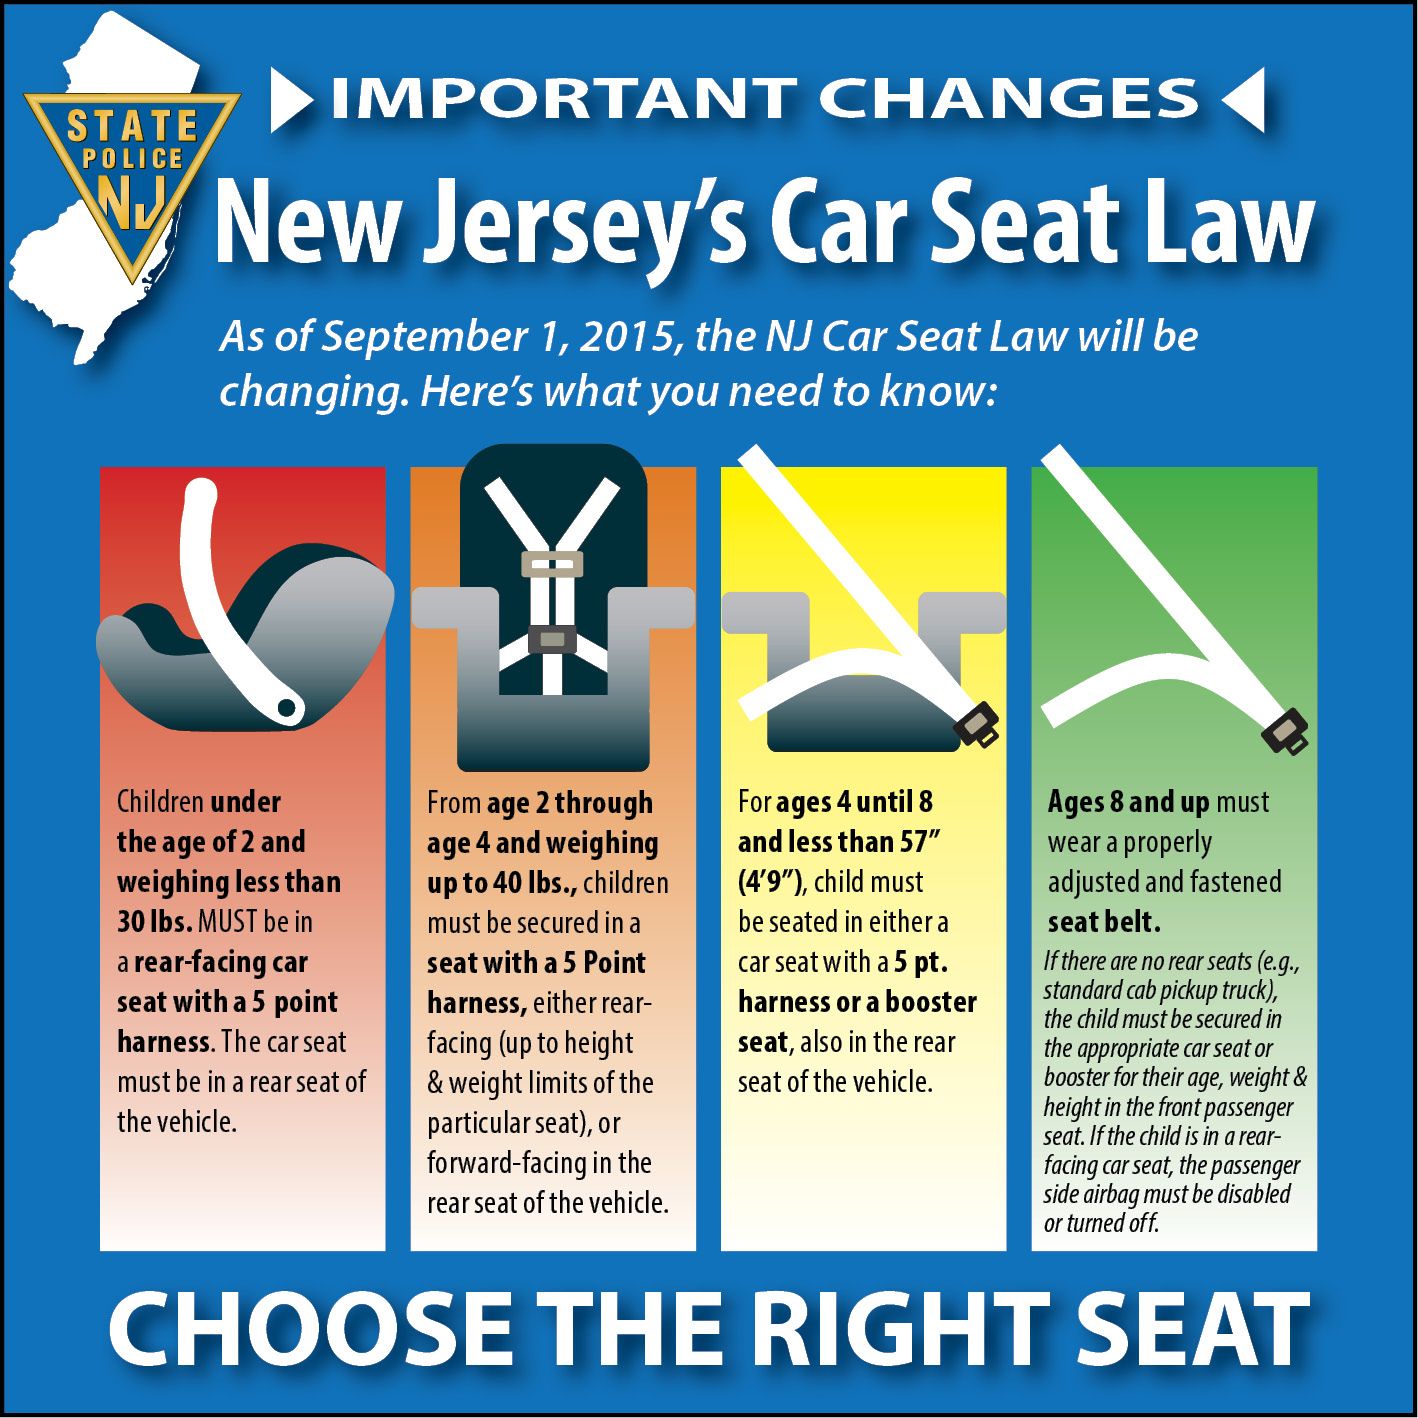 Car Seat Laws Change In New Jersey, What Age And Weight For Forward Facing Car Seat